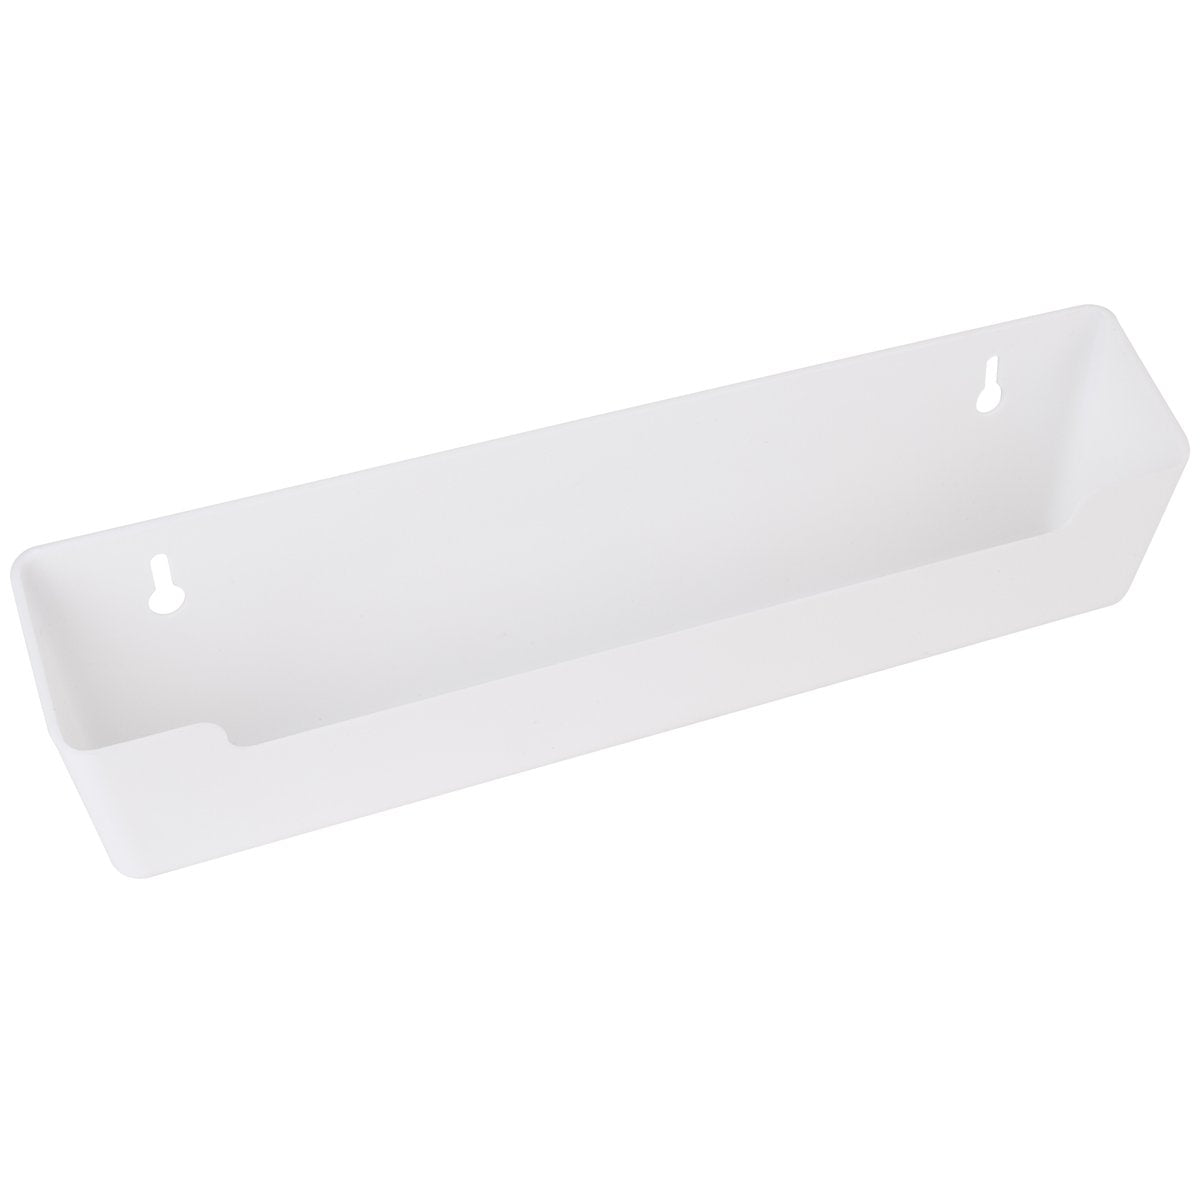 11" Slim Depth Replacement Plastic Tip-Out Tray for Sink Front-DirectCabinets.com